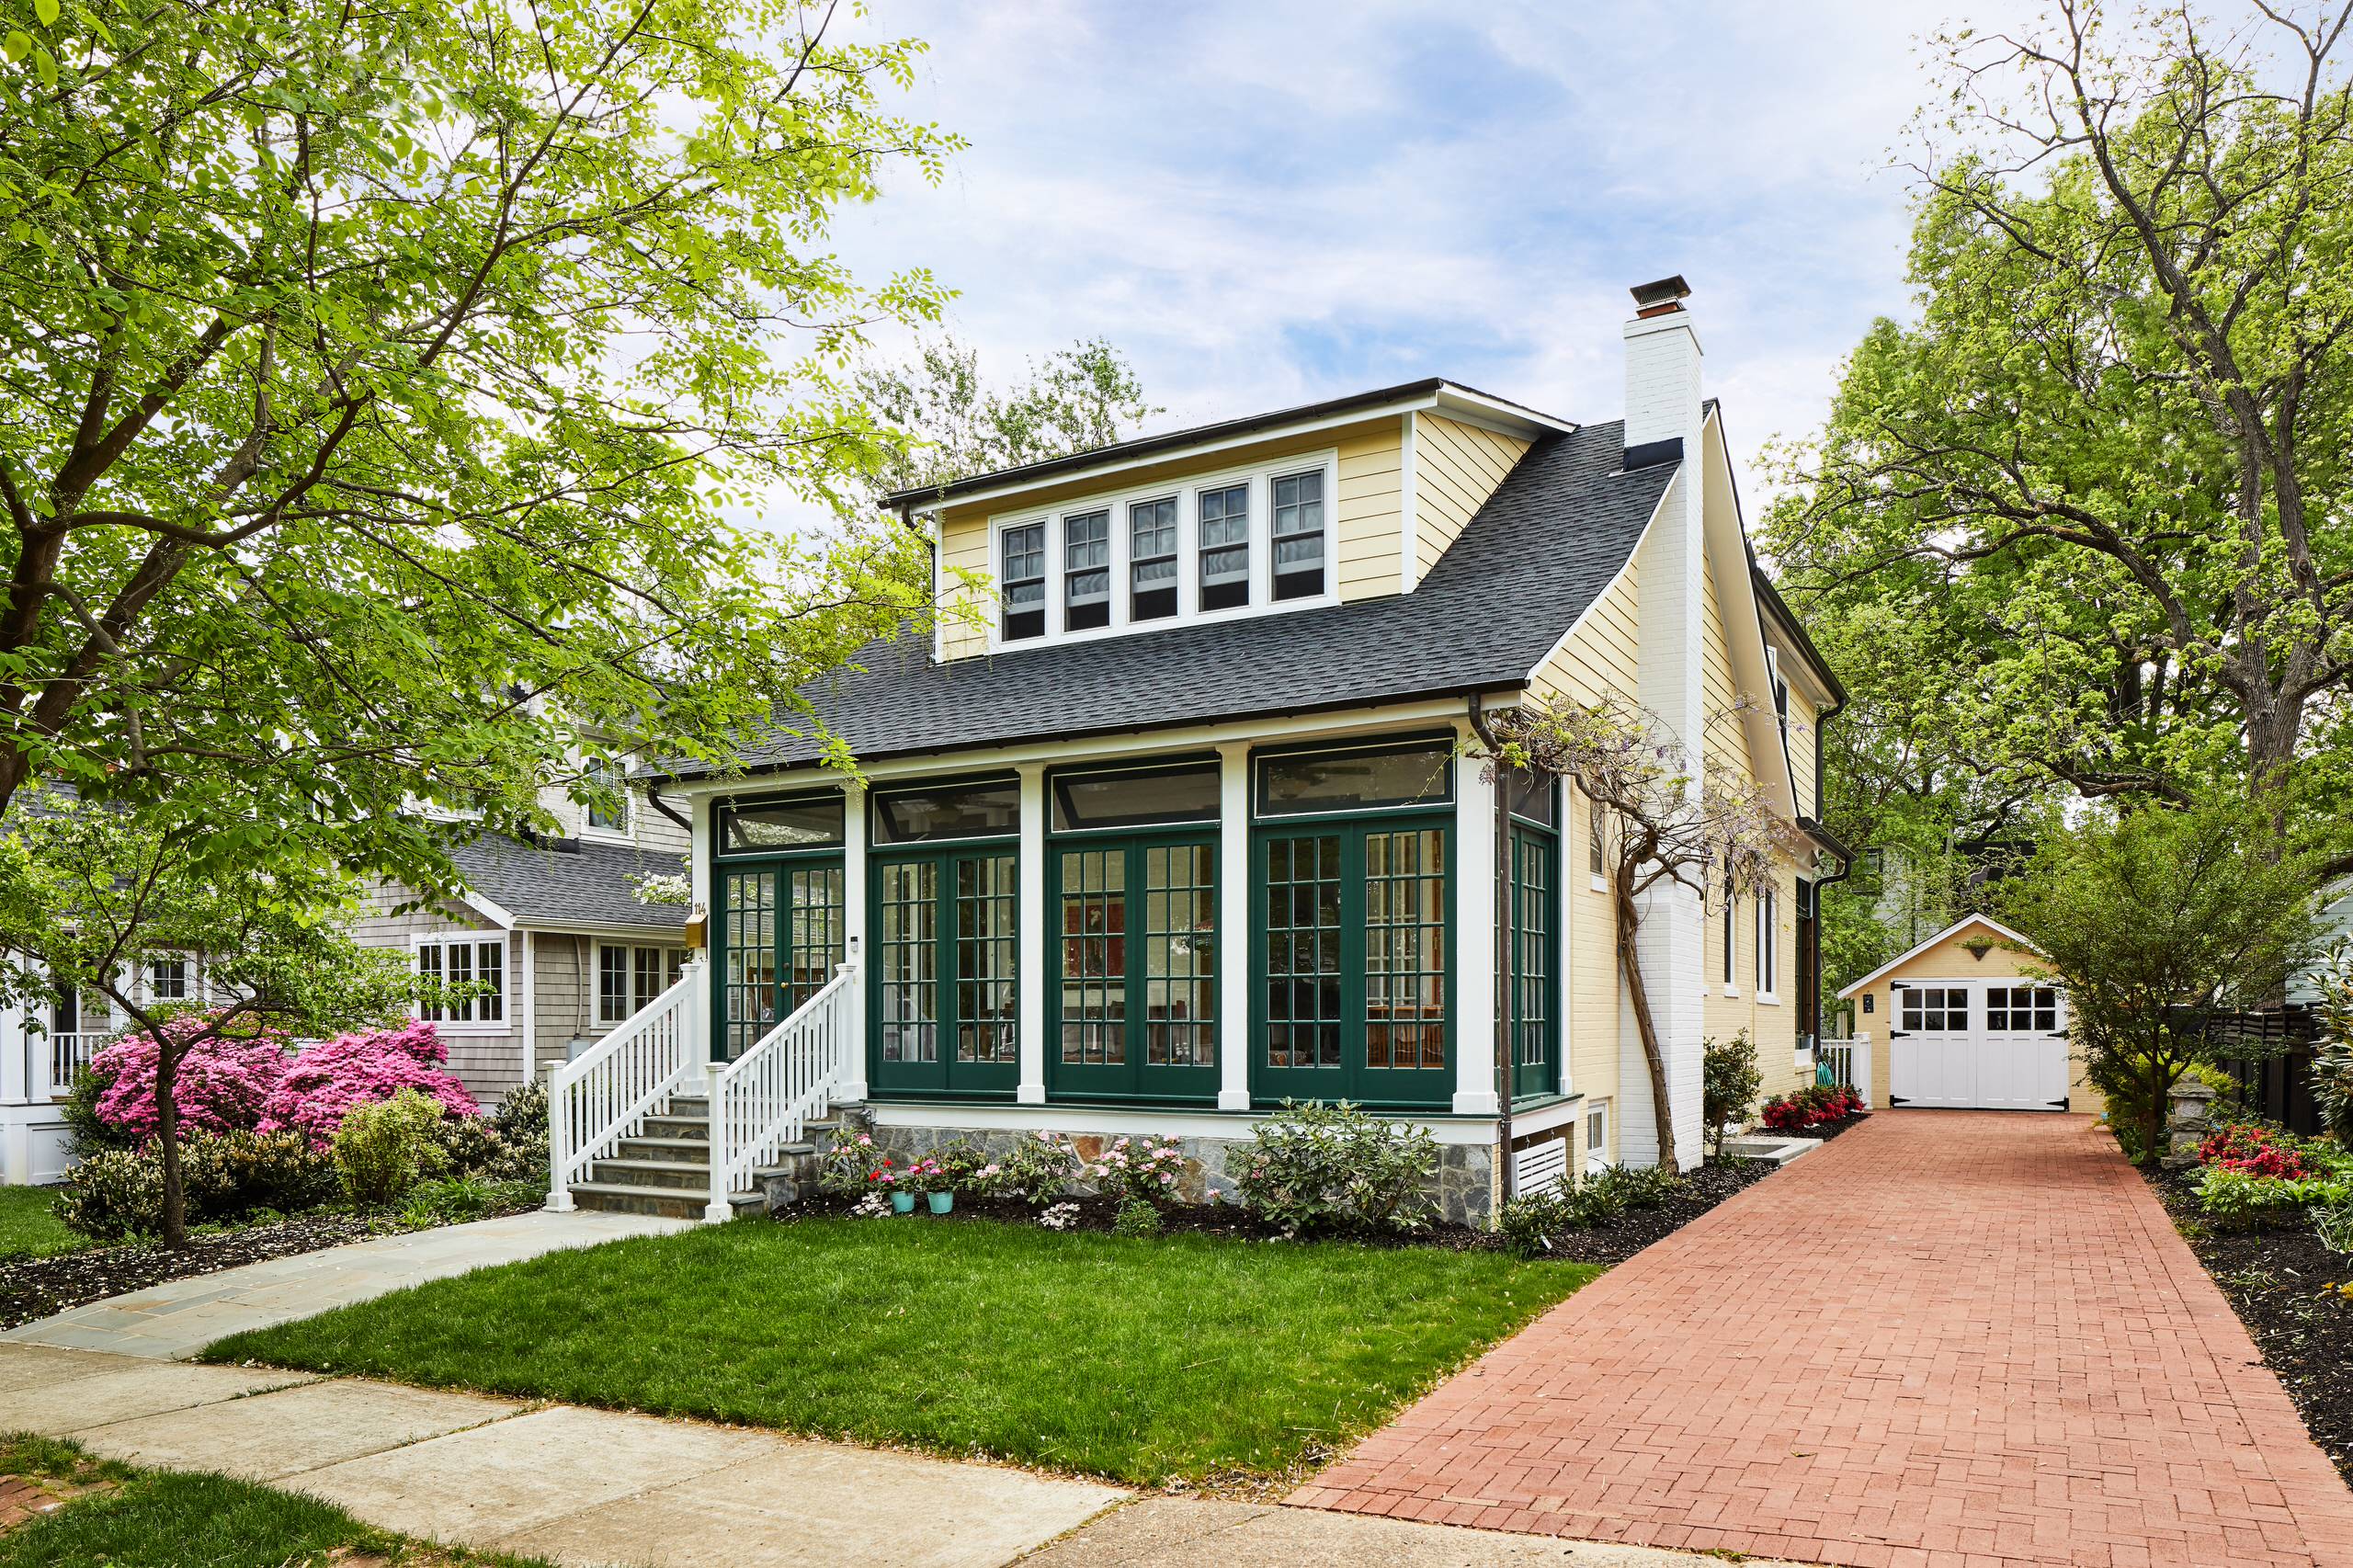 75 Beautiful Yellow Exterior Home Pictures Ideas March 2021 Houzz